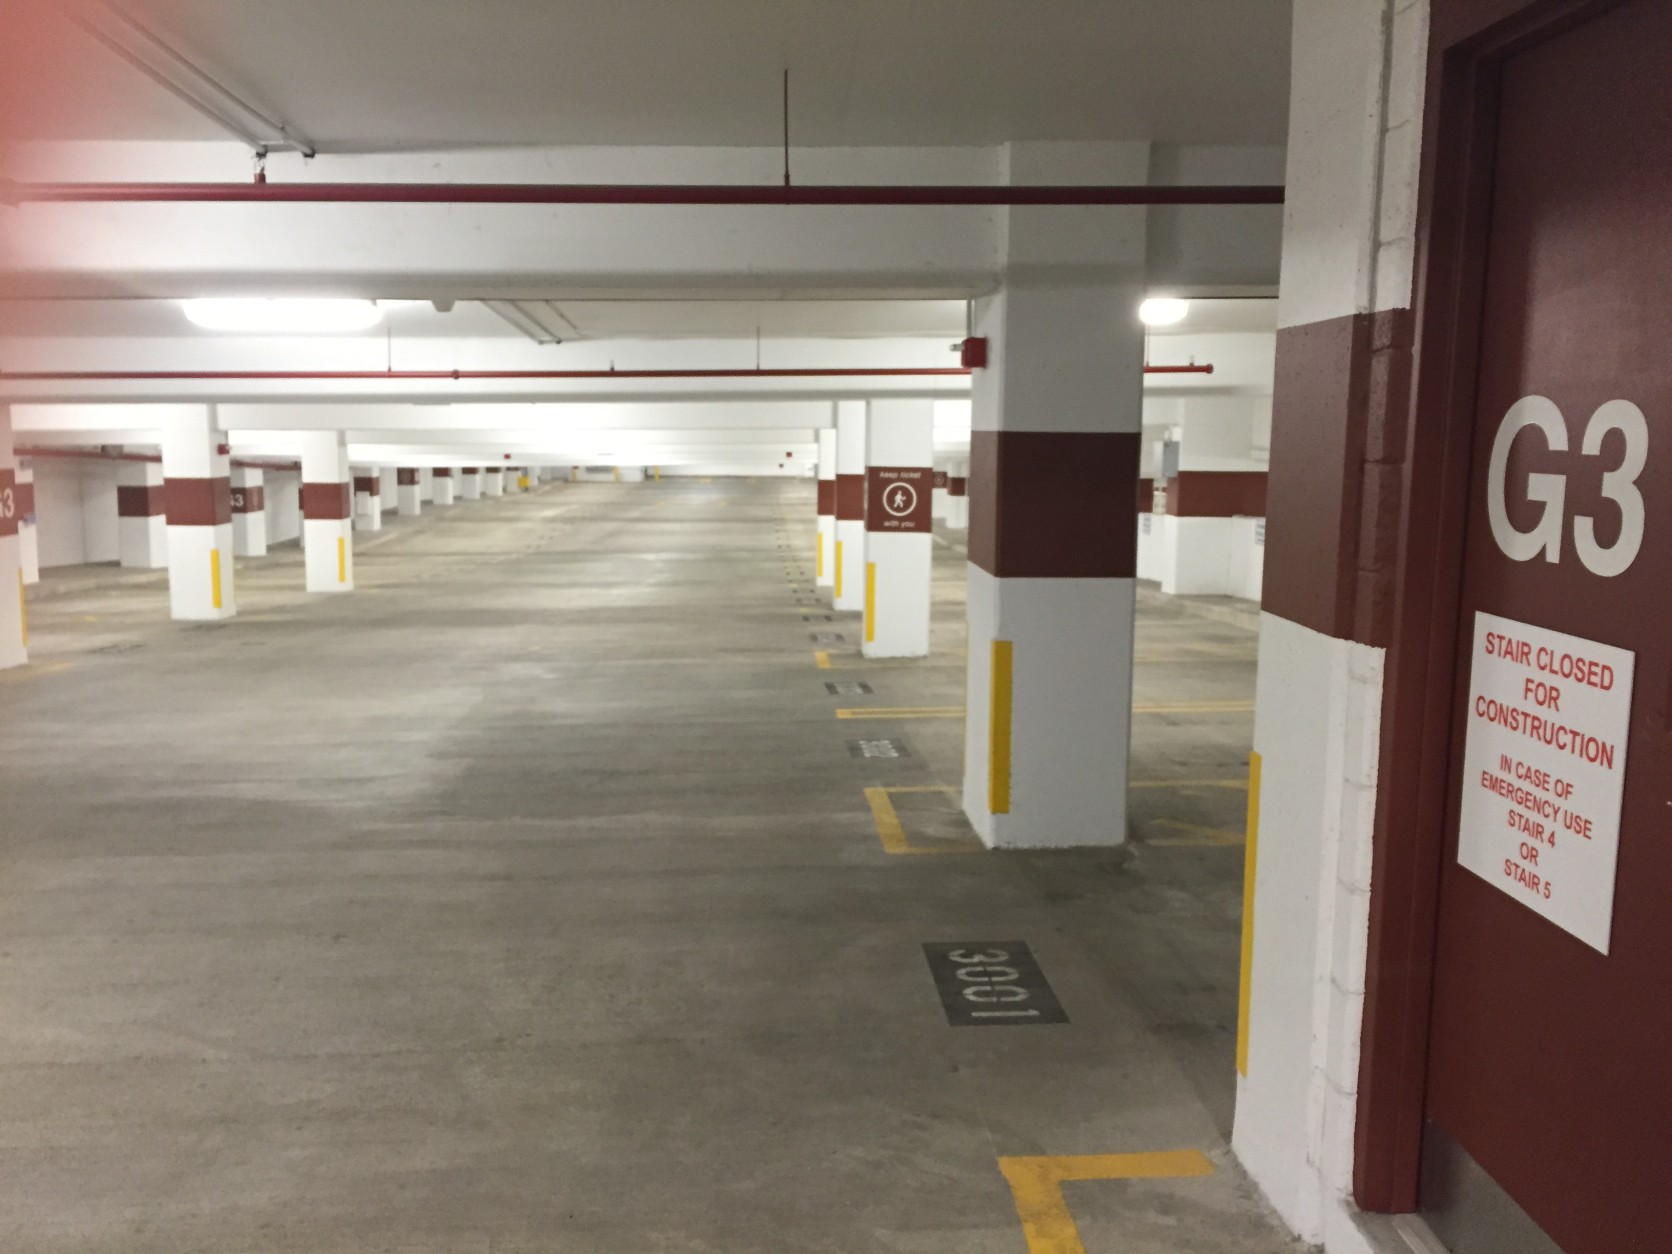 WTOP found large sections of the garage had no cars parked in them, but Montgomery County's acting transportation director Al Roshdieh says the garage was built for the parking demands of the future, not today's. (WTOP/Michelle Basch)